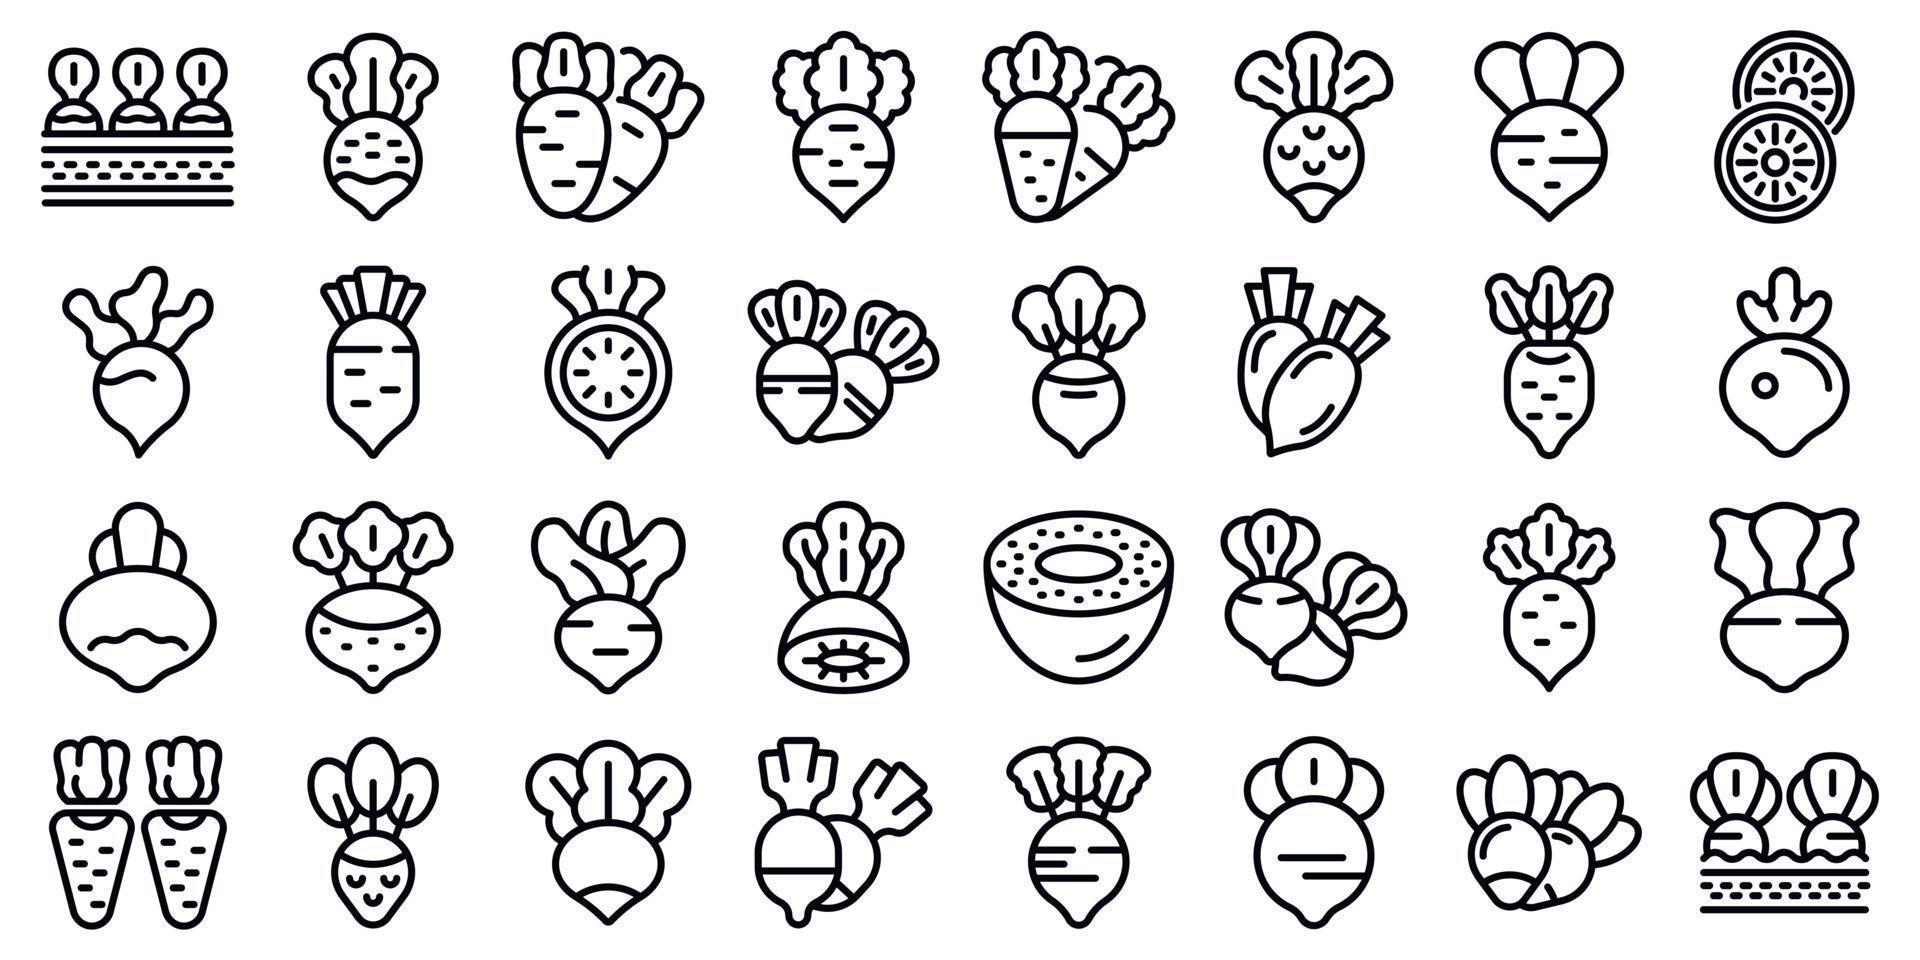 Radish icons set outline vector. Slice agriculture vector